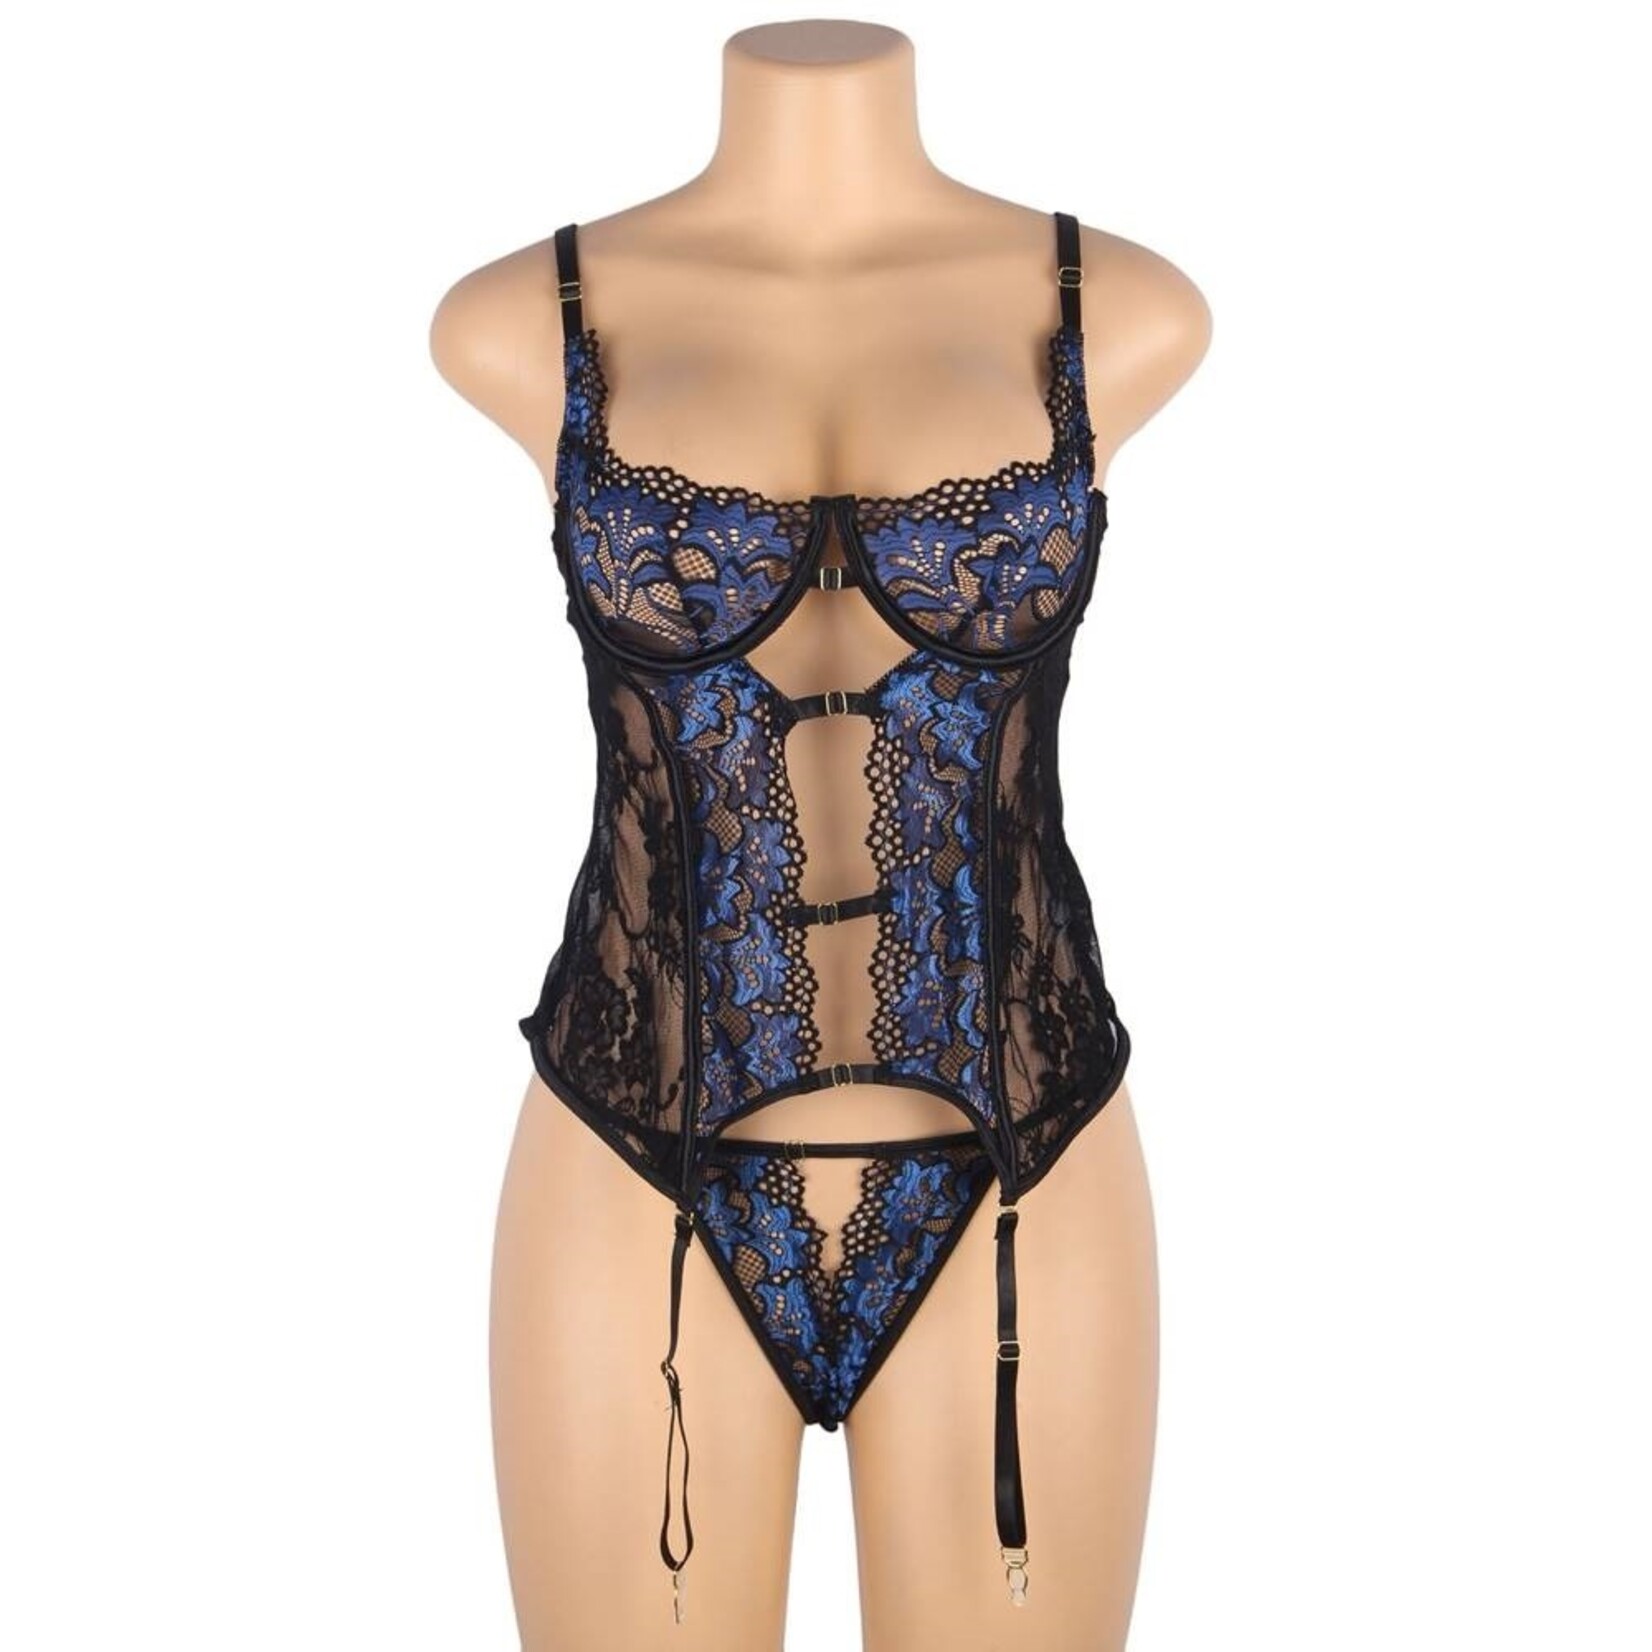 OH YEAH! -  SEXY LACE STITCHING PLUS SIZE GARTERED LINGERIE SET WITH UNDERWIRE M-L